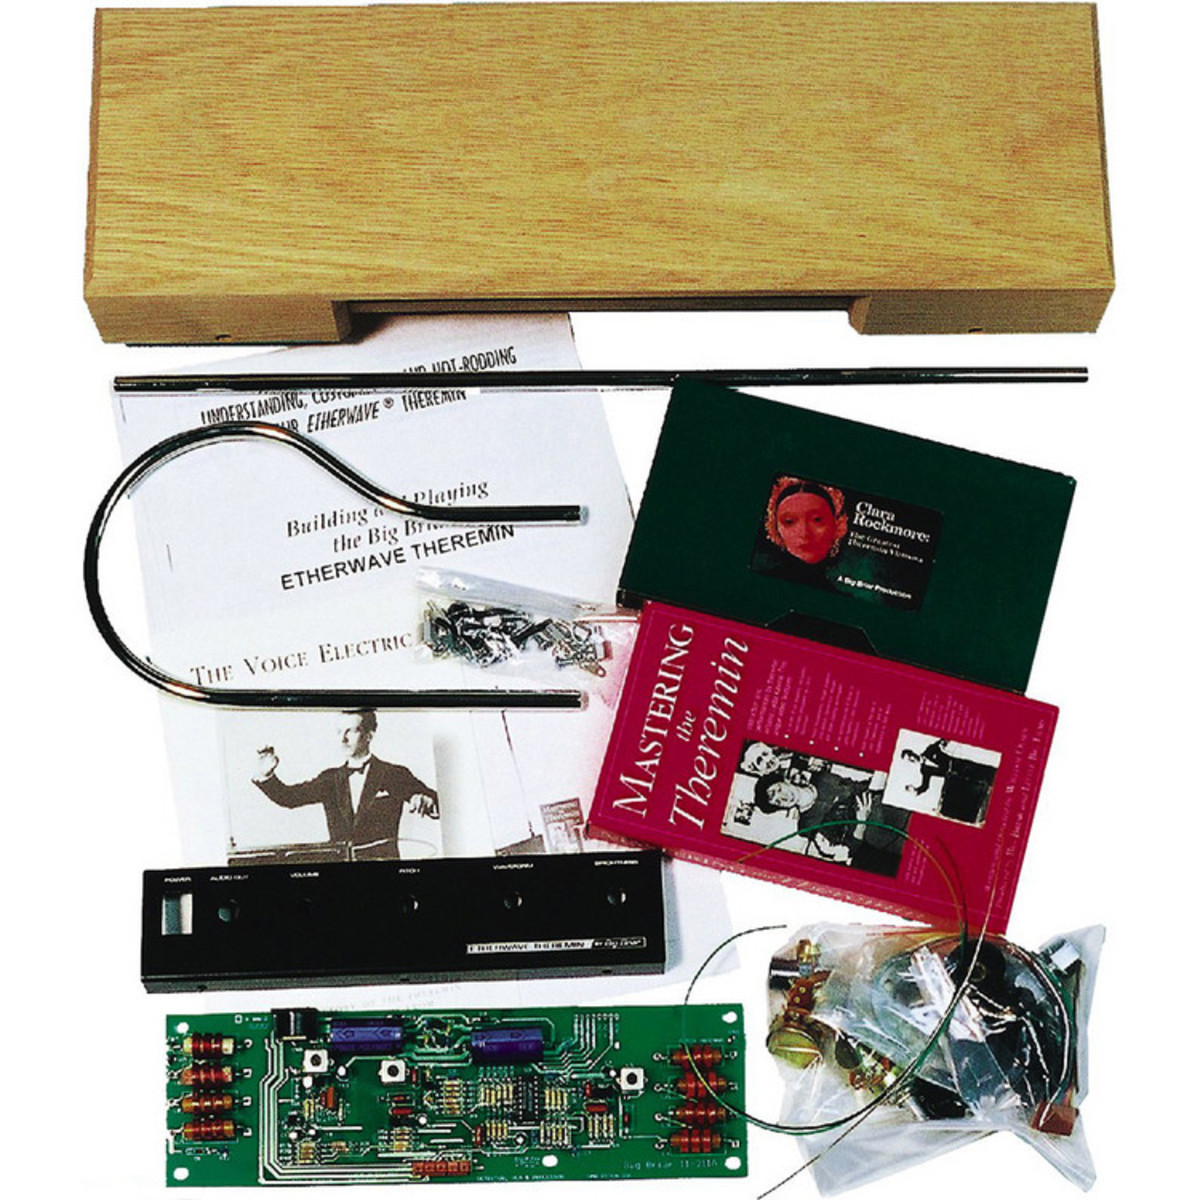 DIY Theremin Kits
 Moog Etherwave Theremin Build It Yourself Kit at